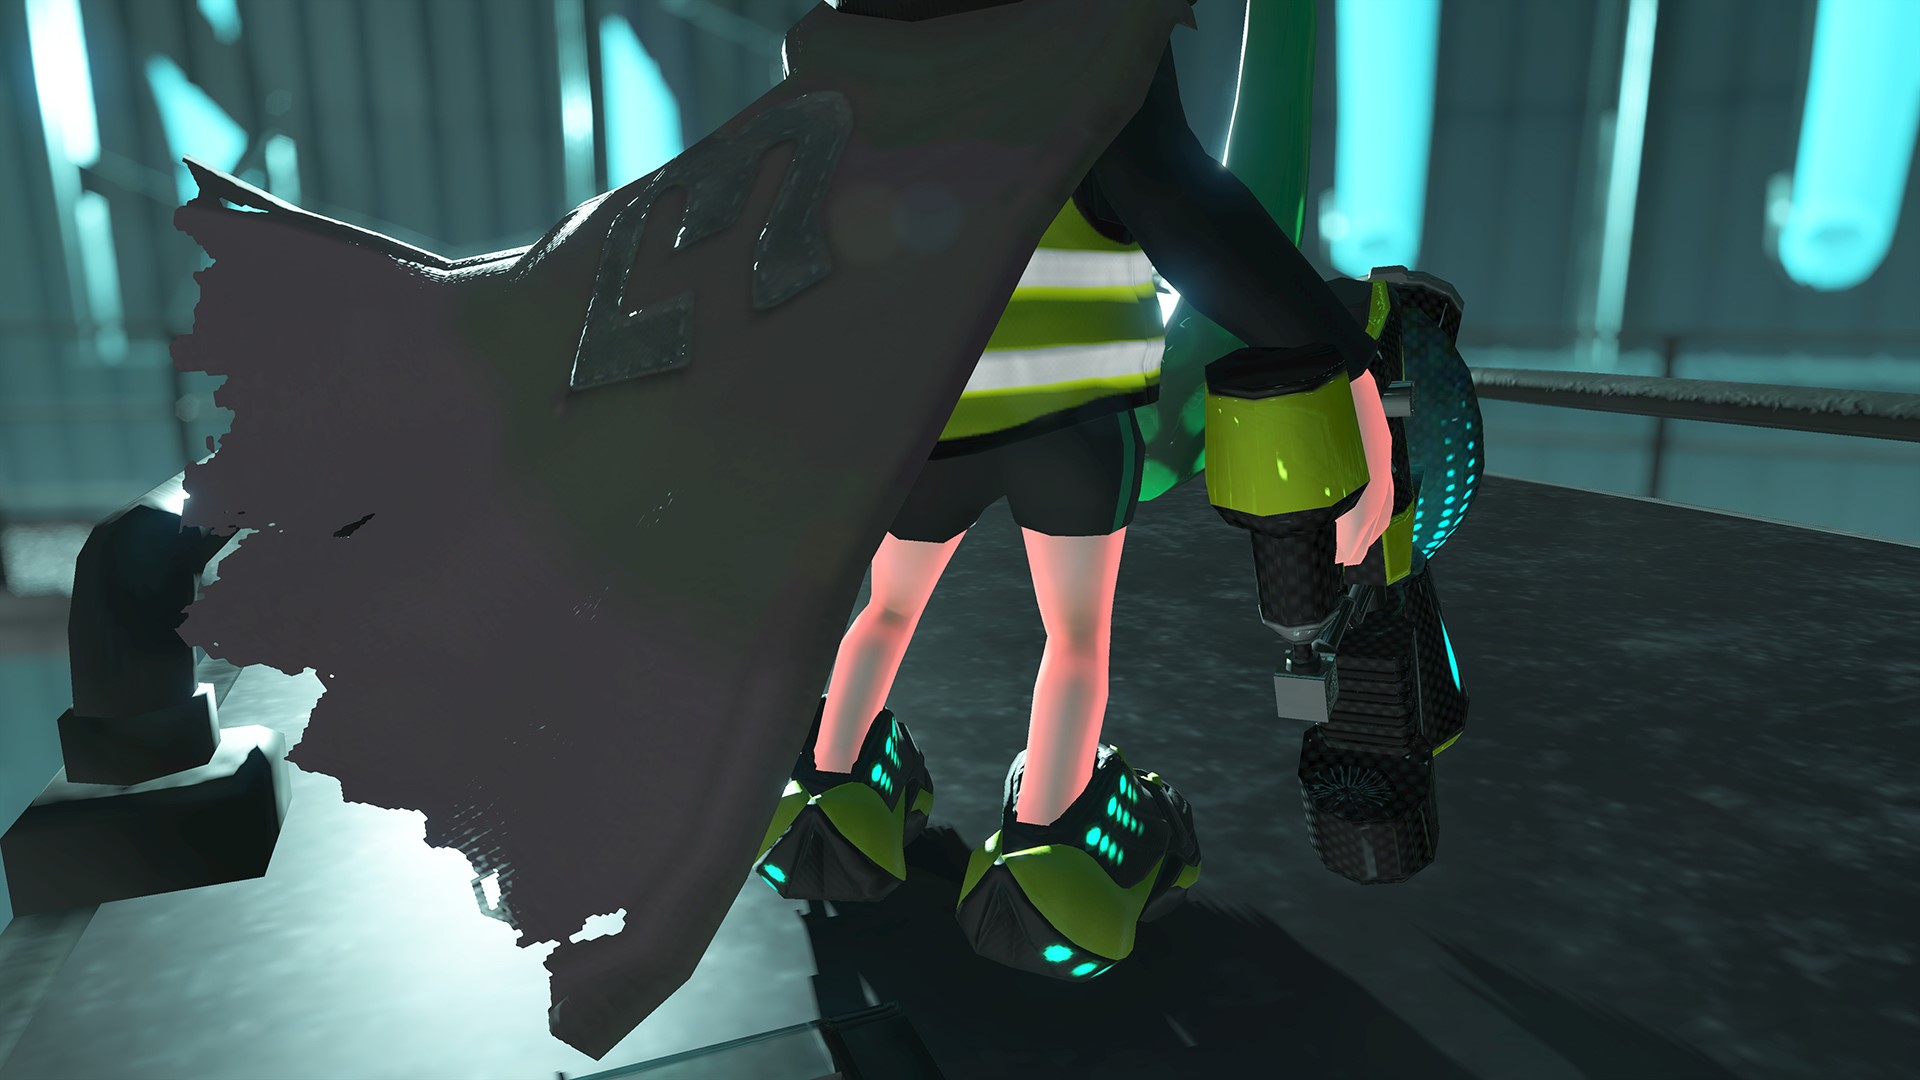 Splatoon 2: Octo Expansion details and images - some Zelda: Breath of the Wild devs ...